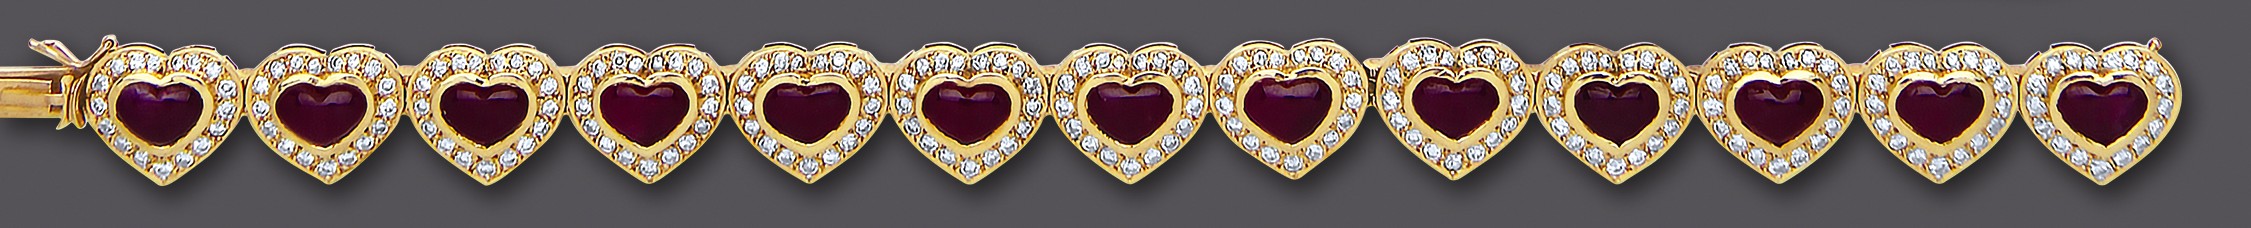 A RUBY AND DIAMOND BRACELET, the thirteen heart shaped links each centred by a polished heart shaped